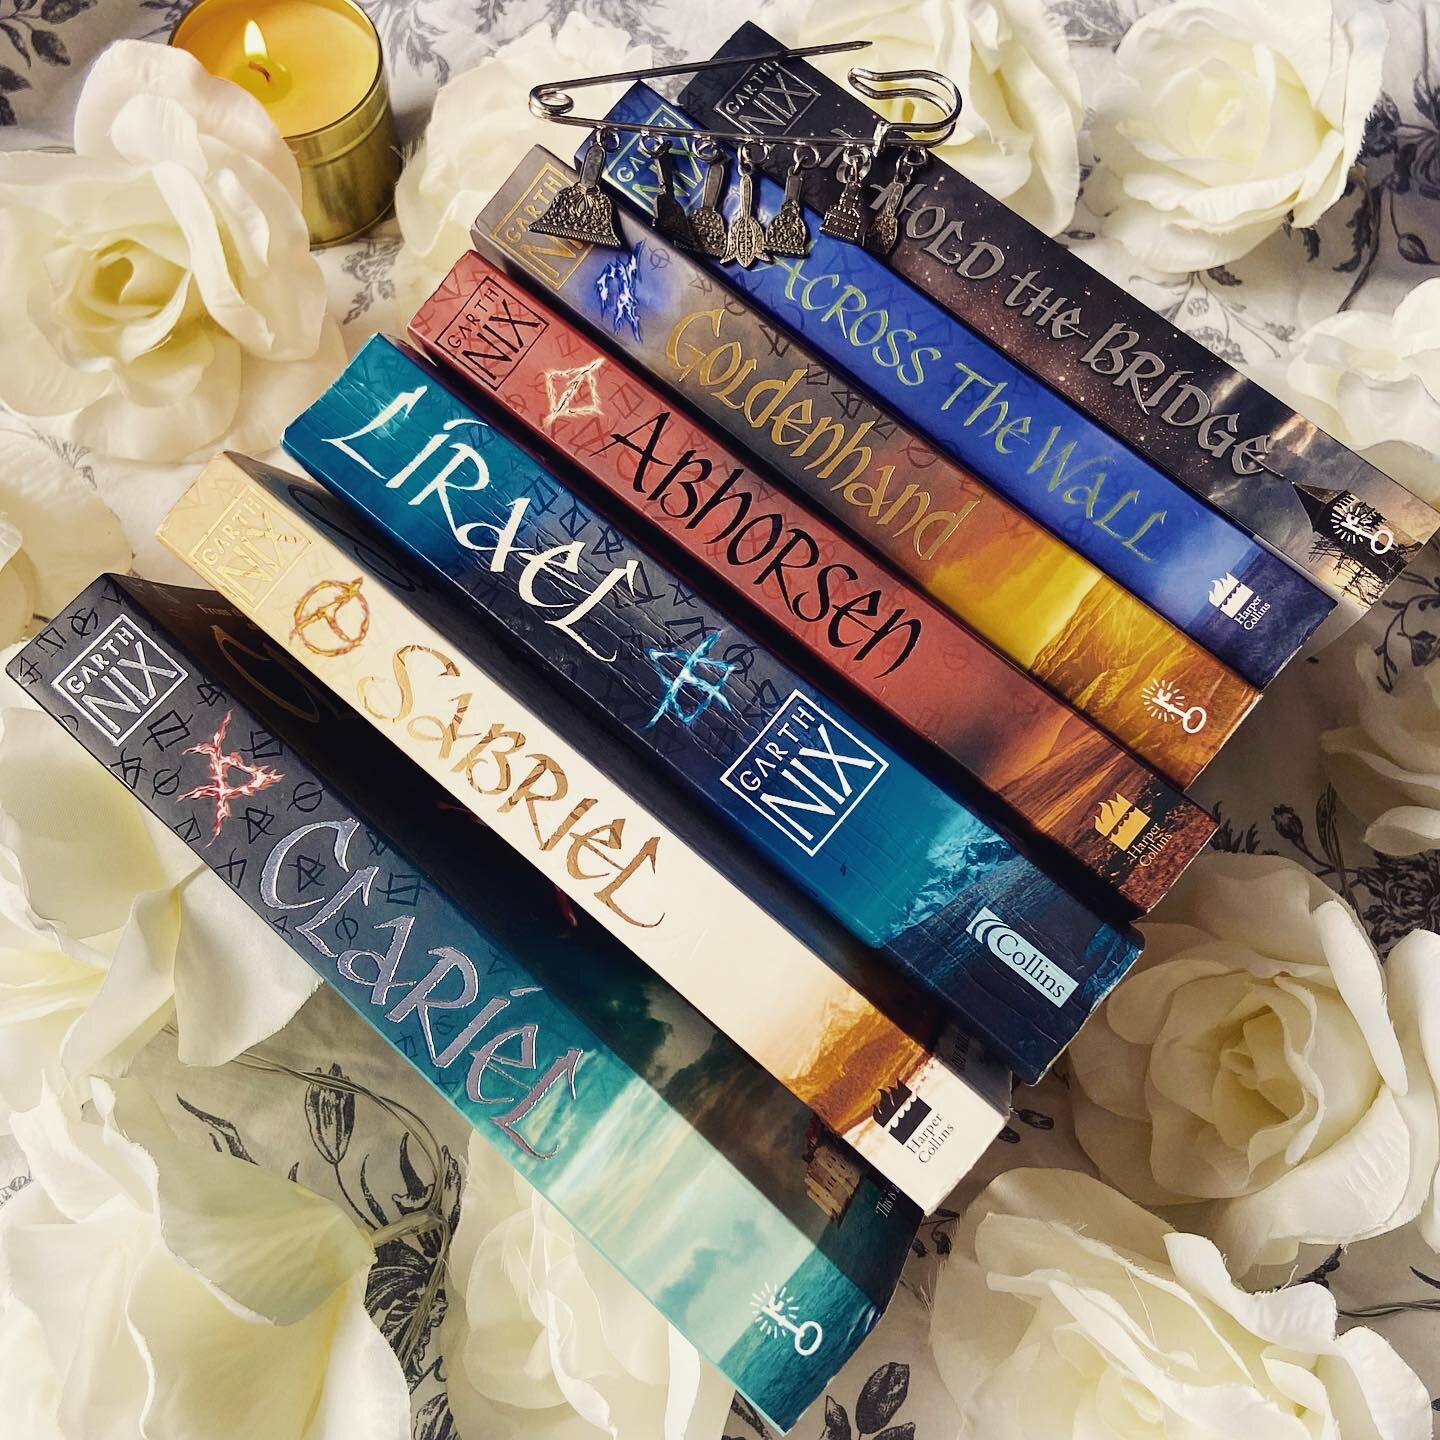 🌟🔔𝐓𝐡𝐞 𝐎𝐥𝐝 𝐊𝐢𝐧𝐠𝐝𝐨𝐦 𝐒𝐞𝐫𝐢𝐞𝐬🔔🌟⁣
⁣
If somebody knows where I can purchase a copy of Lirael that&rsquo;s spine matches the others, please do let me know, because this just won&rsquo;t do&hellip; 😂😭⁣
⁣
⭐️I can&rsquo;t recommend this